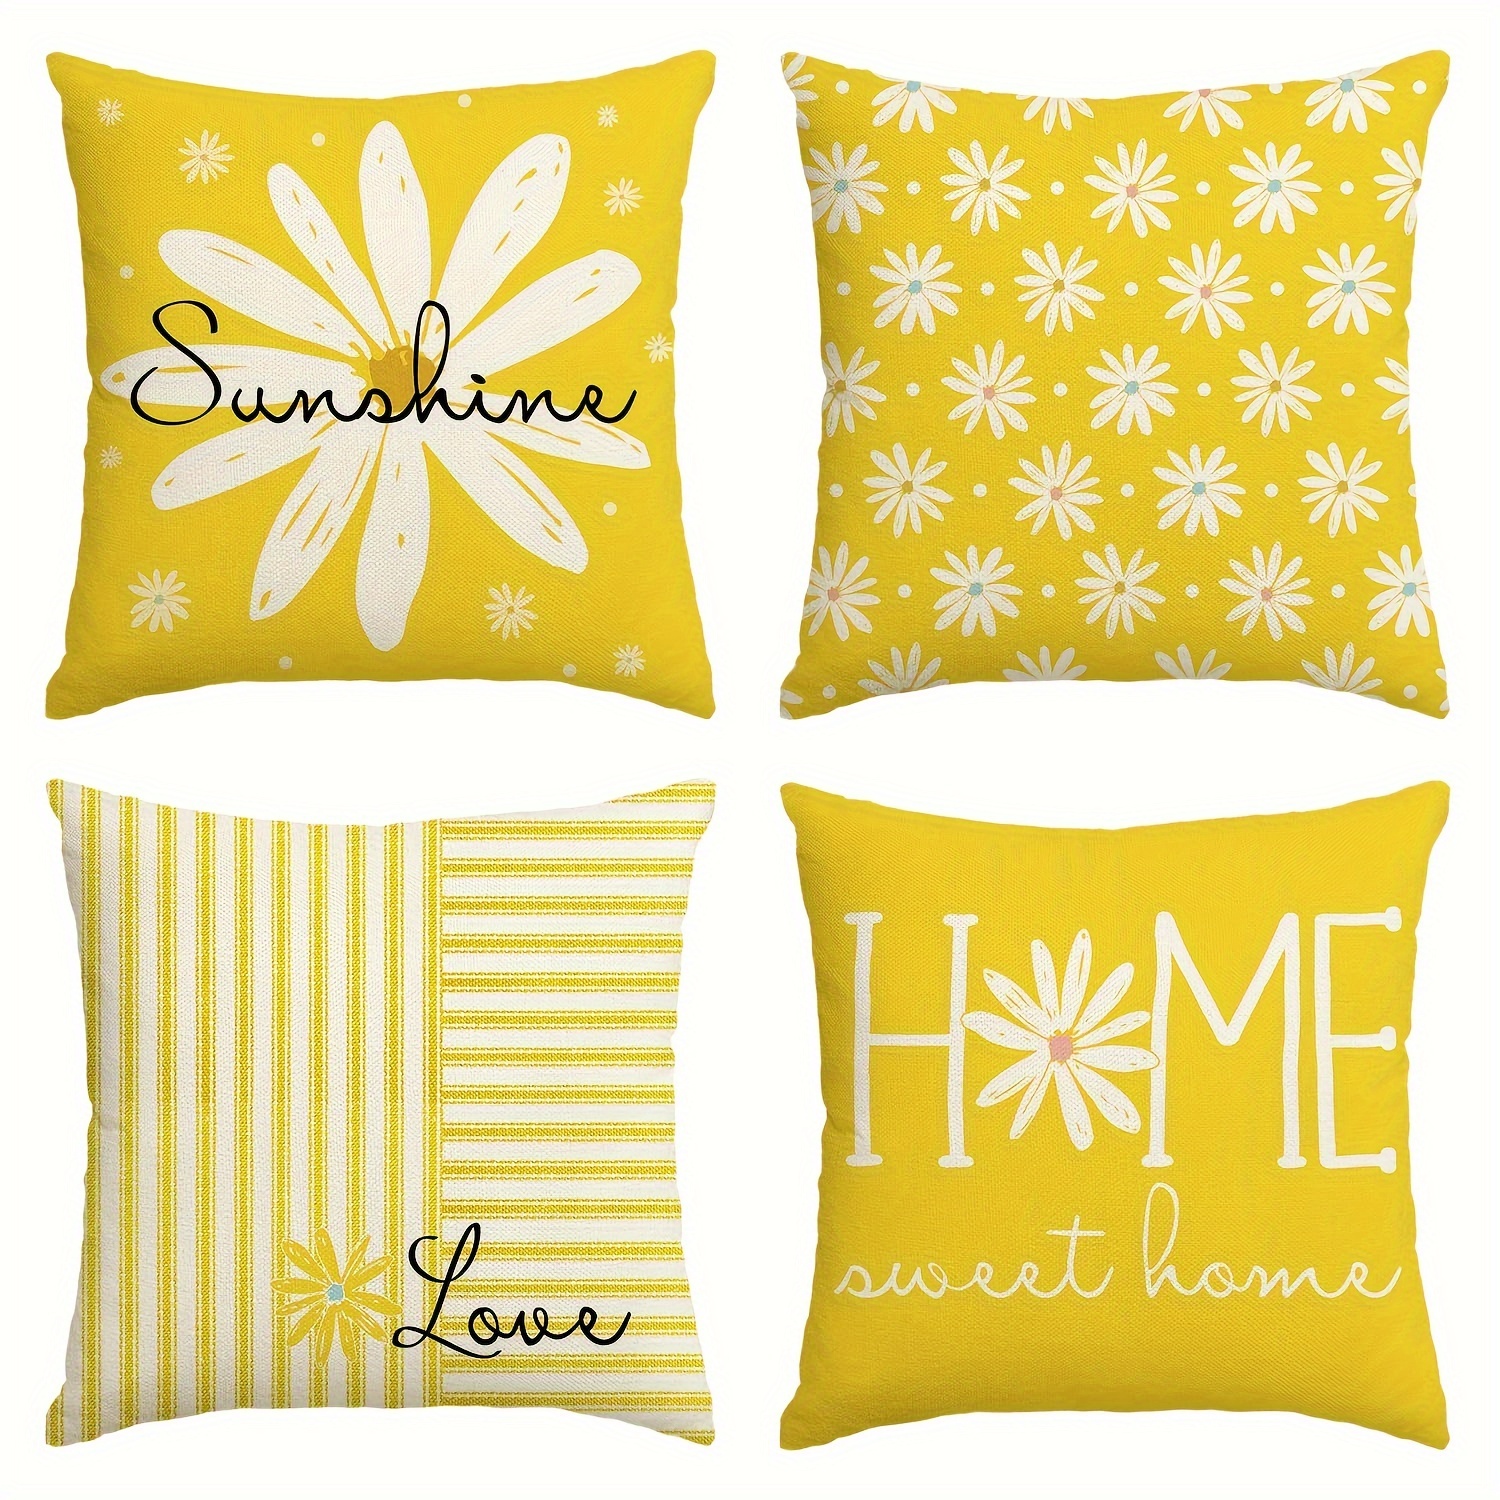 

Sm:)e Hello Sunshine Yellow Throw Pillow Covers, 18 X 18 Inch Home Sweet Home Daisy Stripes Cushion Case For Sofa Couch Set Of 4